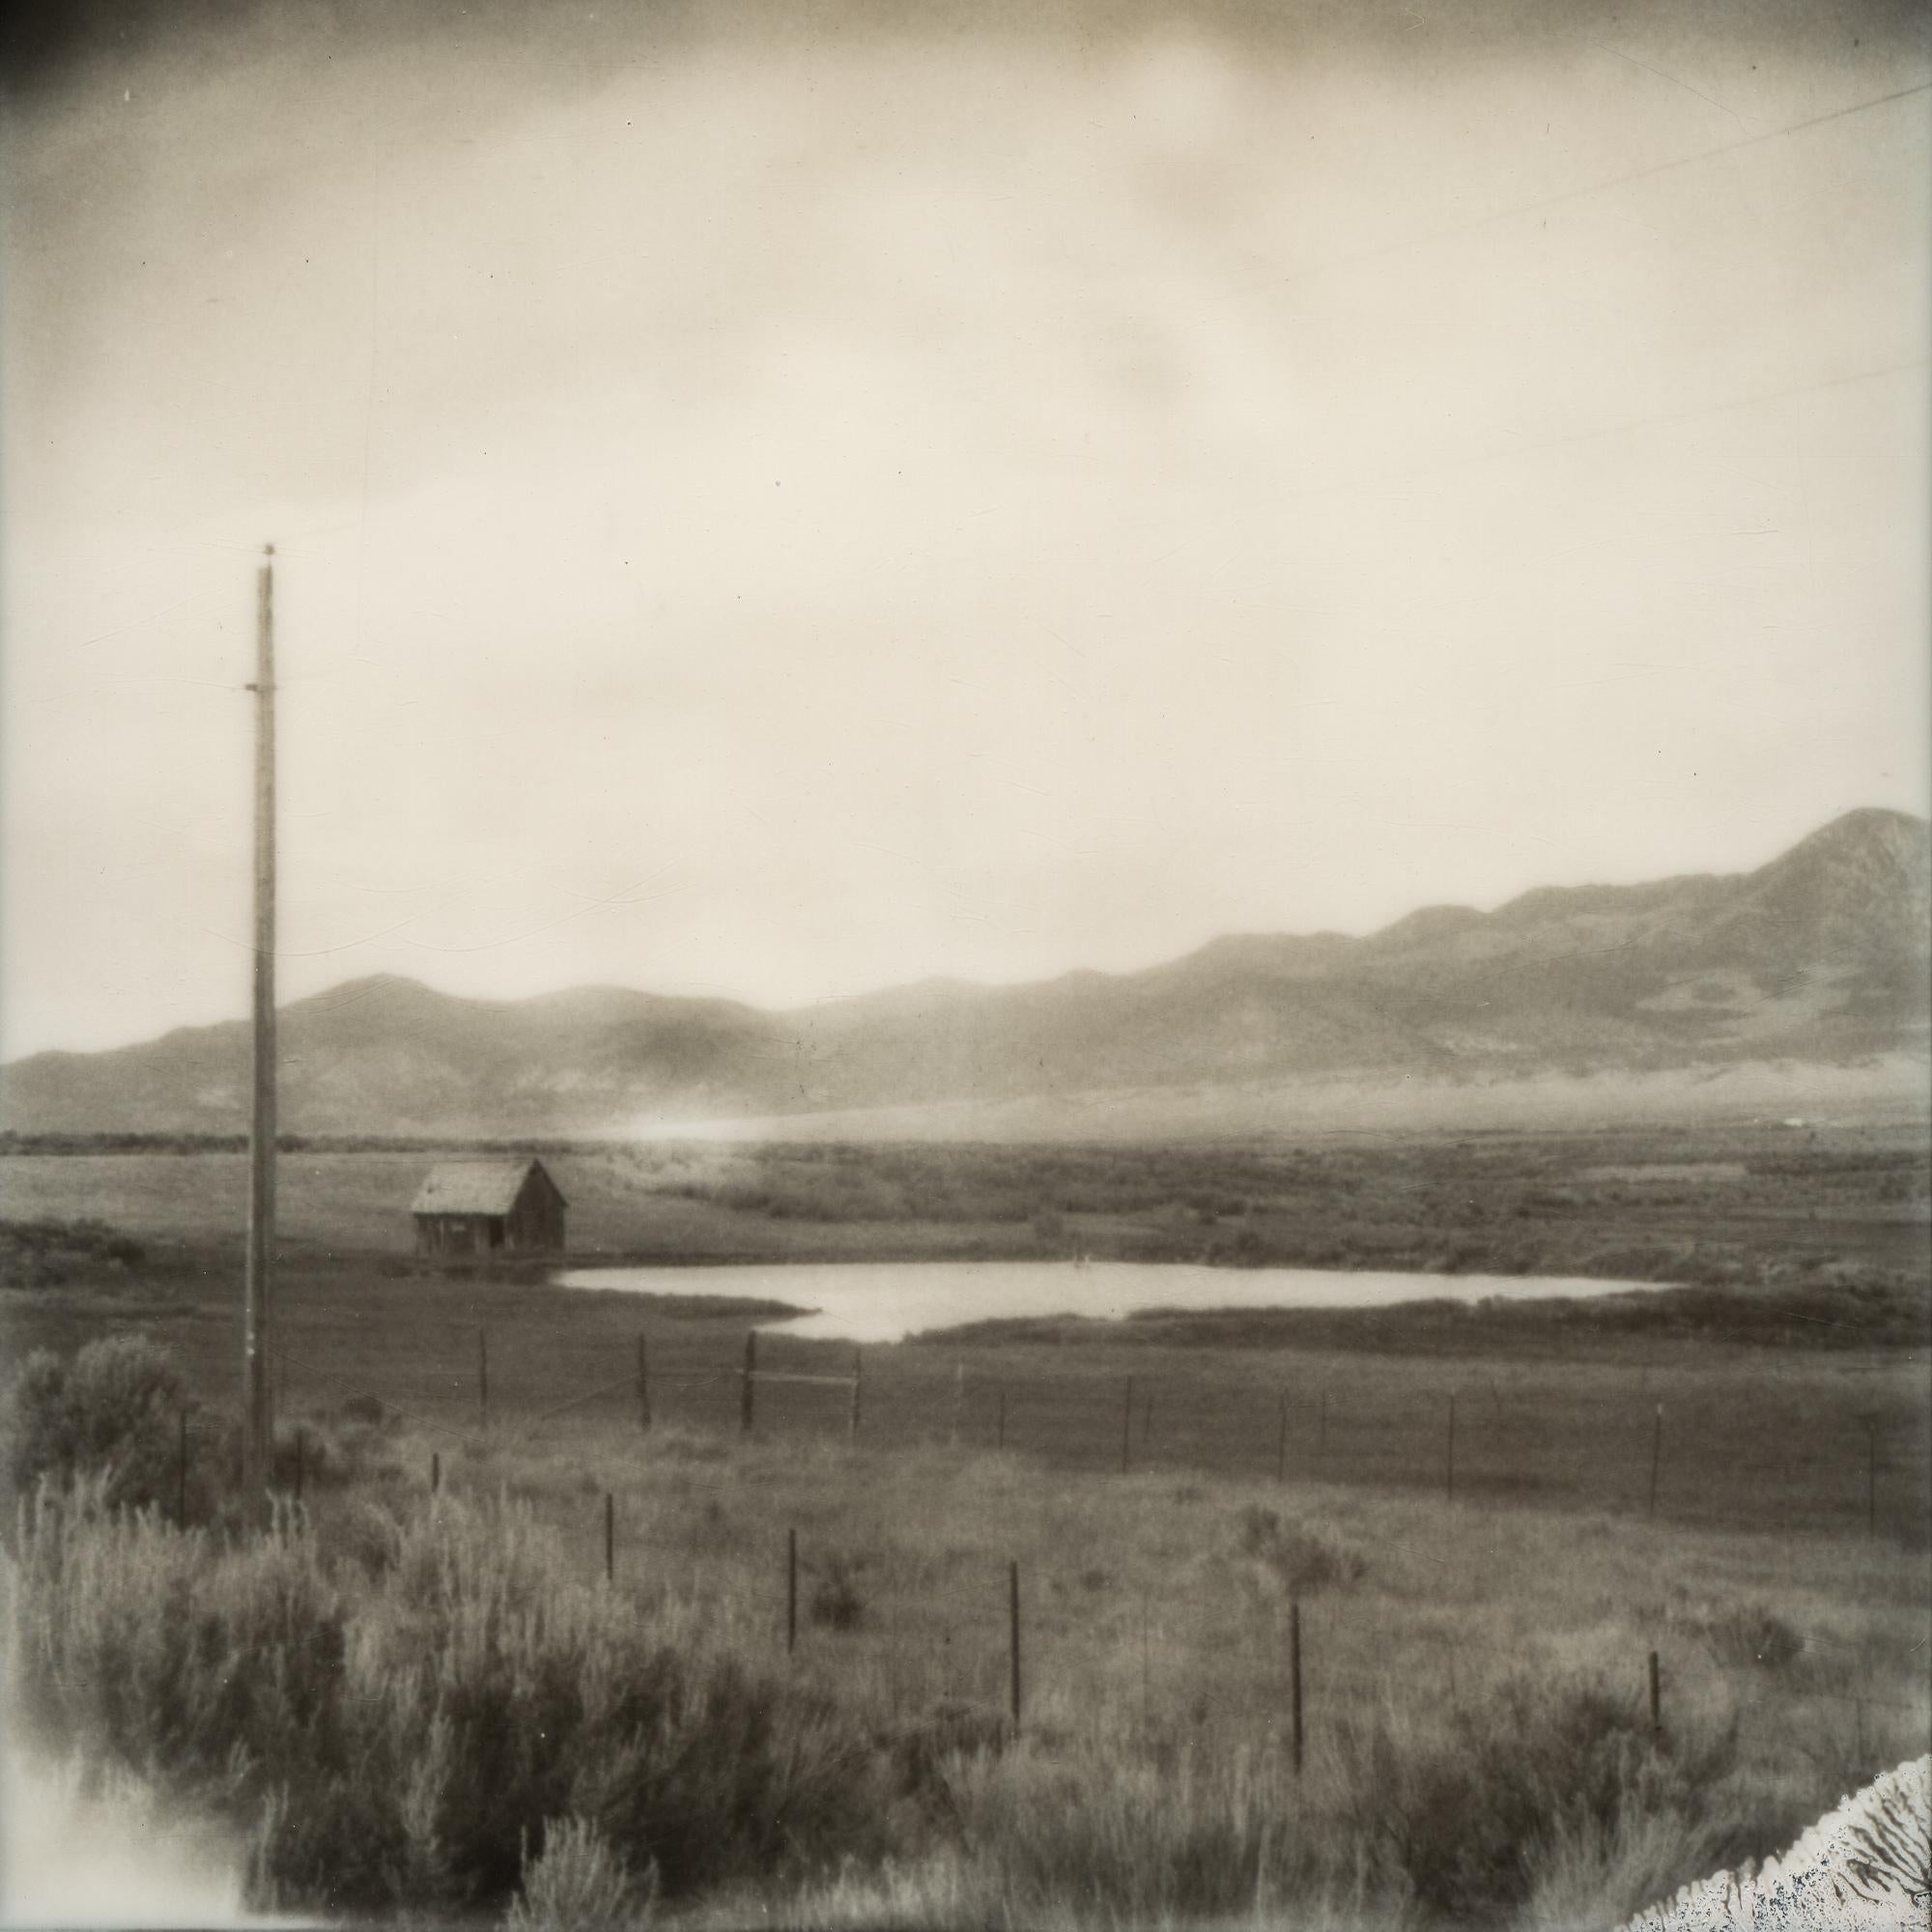 'Little House on the Prairie', 2018, 
Edition of 7 plus 2 Artist Proofs, 
Archival C-print, Based on a Polaroid, 
Not mounted. Signed on the back and with certificate. Artist inventory PL2018-425

Kirsten Thys van den Audenaerde is a self-taught